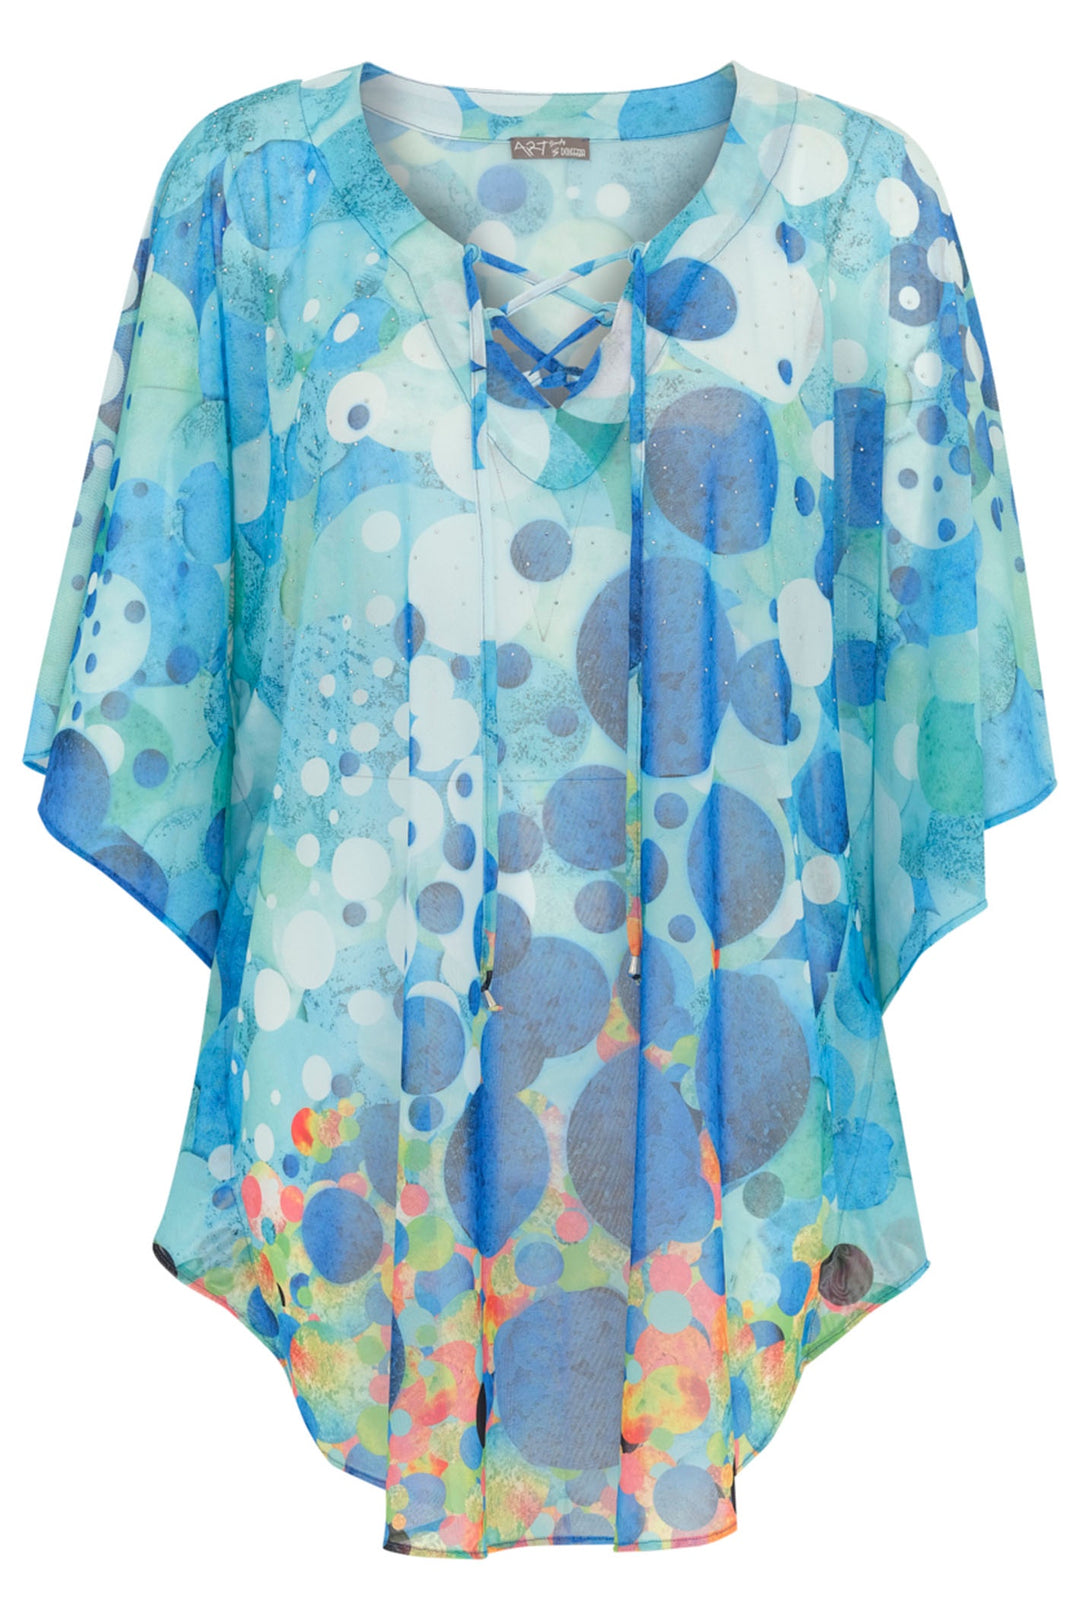 Dolcezza 24801 Turquoise Blue Big Angel Fish Mosaic Tie Neck Top - Dotique Chesterfield